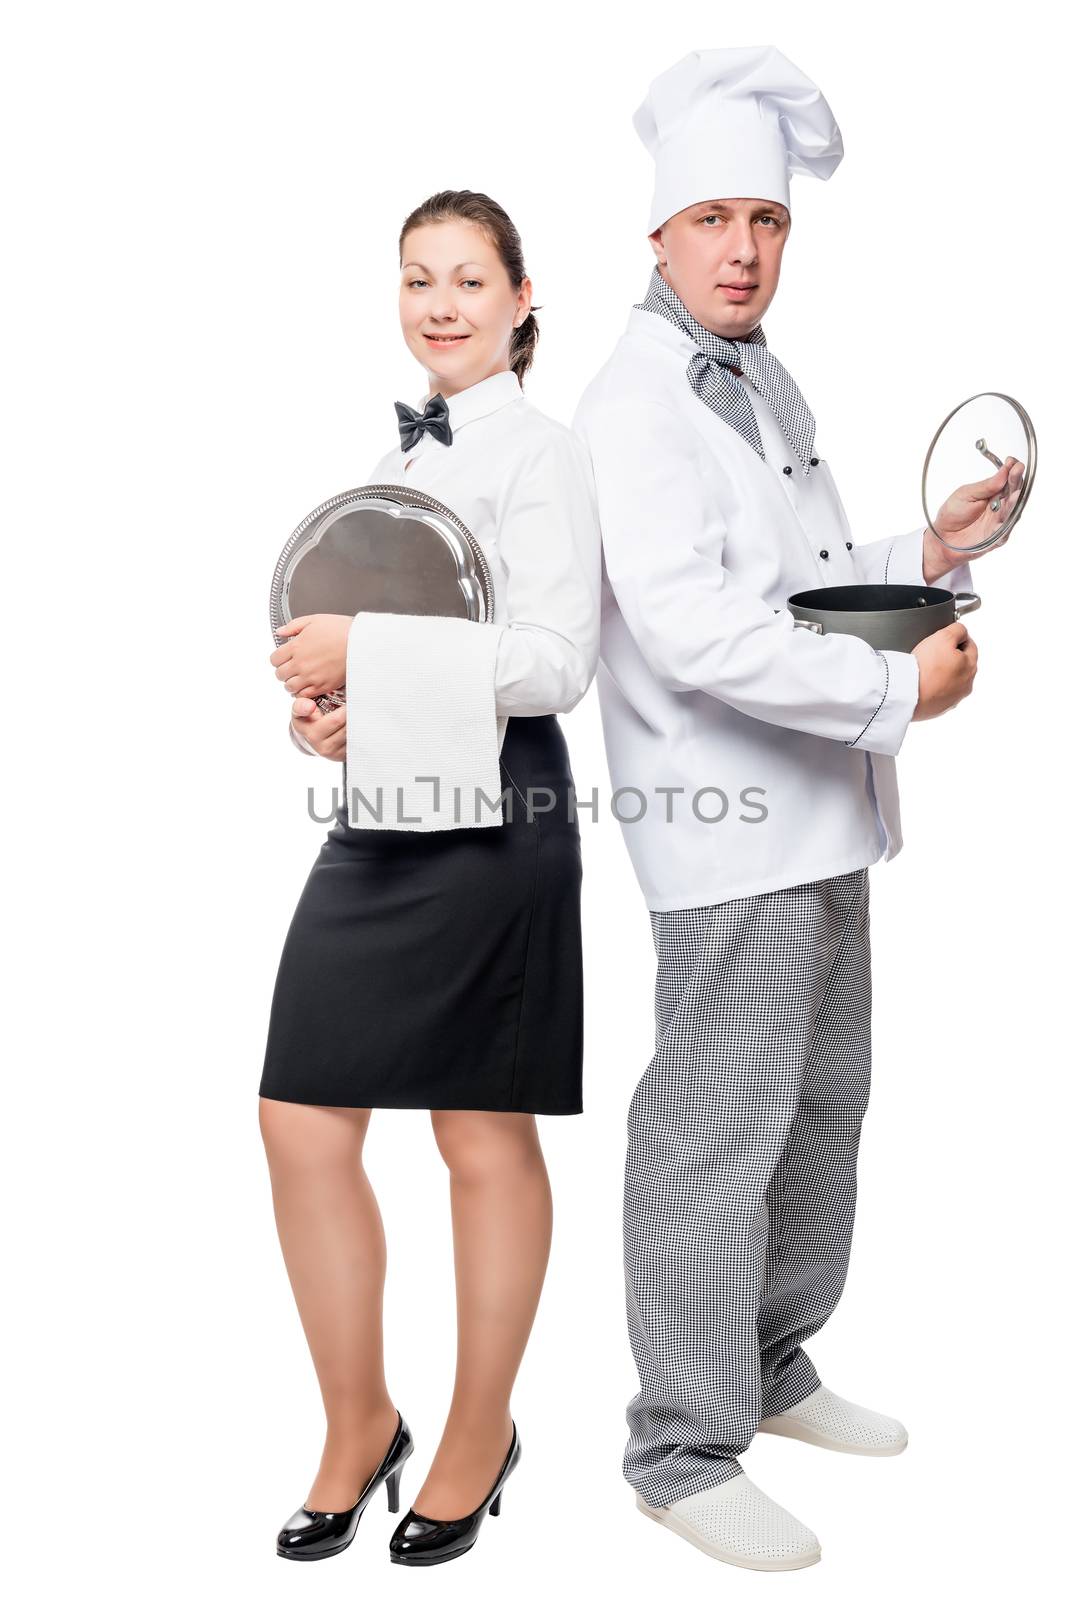 Team waiter and chef portrait on white background by kosmsos111